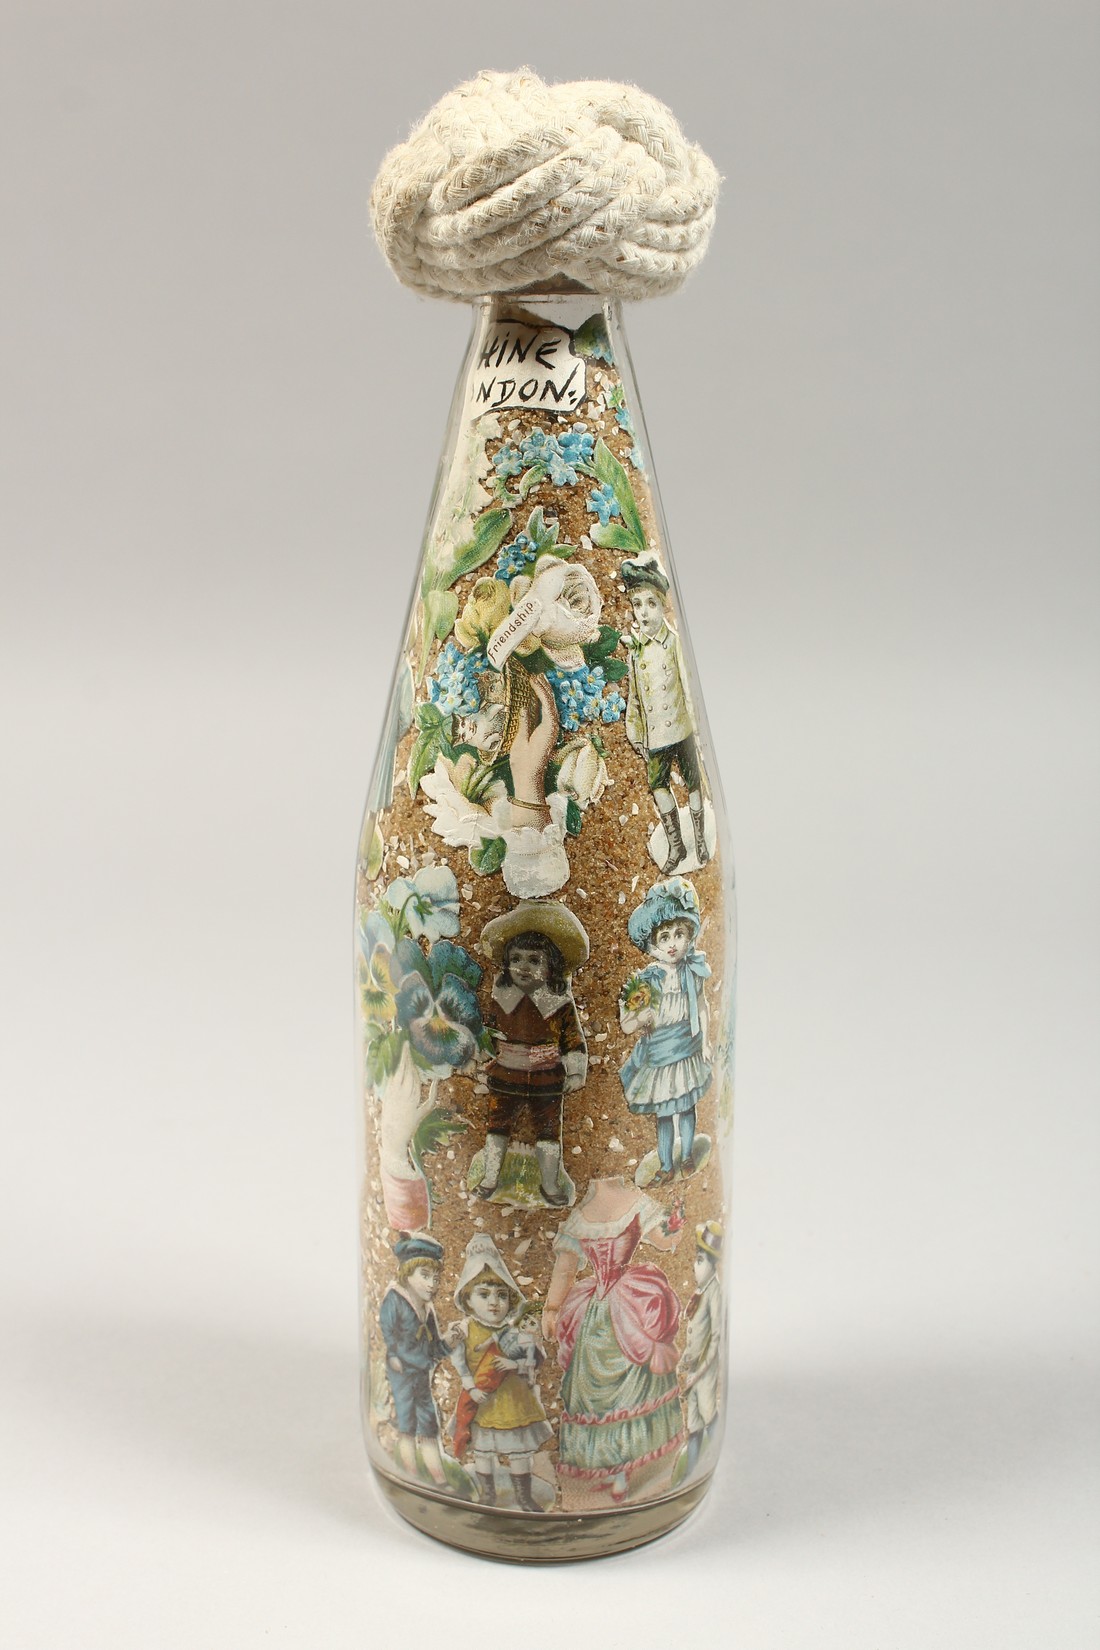 A LOVE TOKEN BOTTLE, DATED 1891. 10.5ins high. - Image 4 of 8